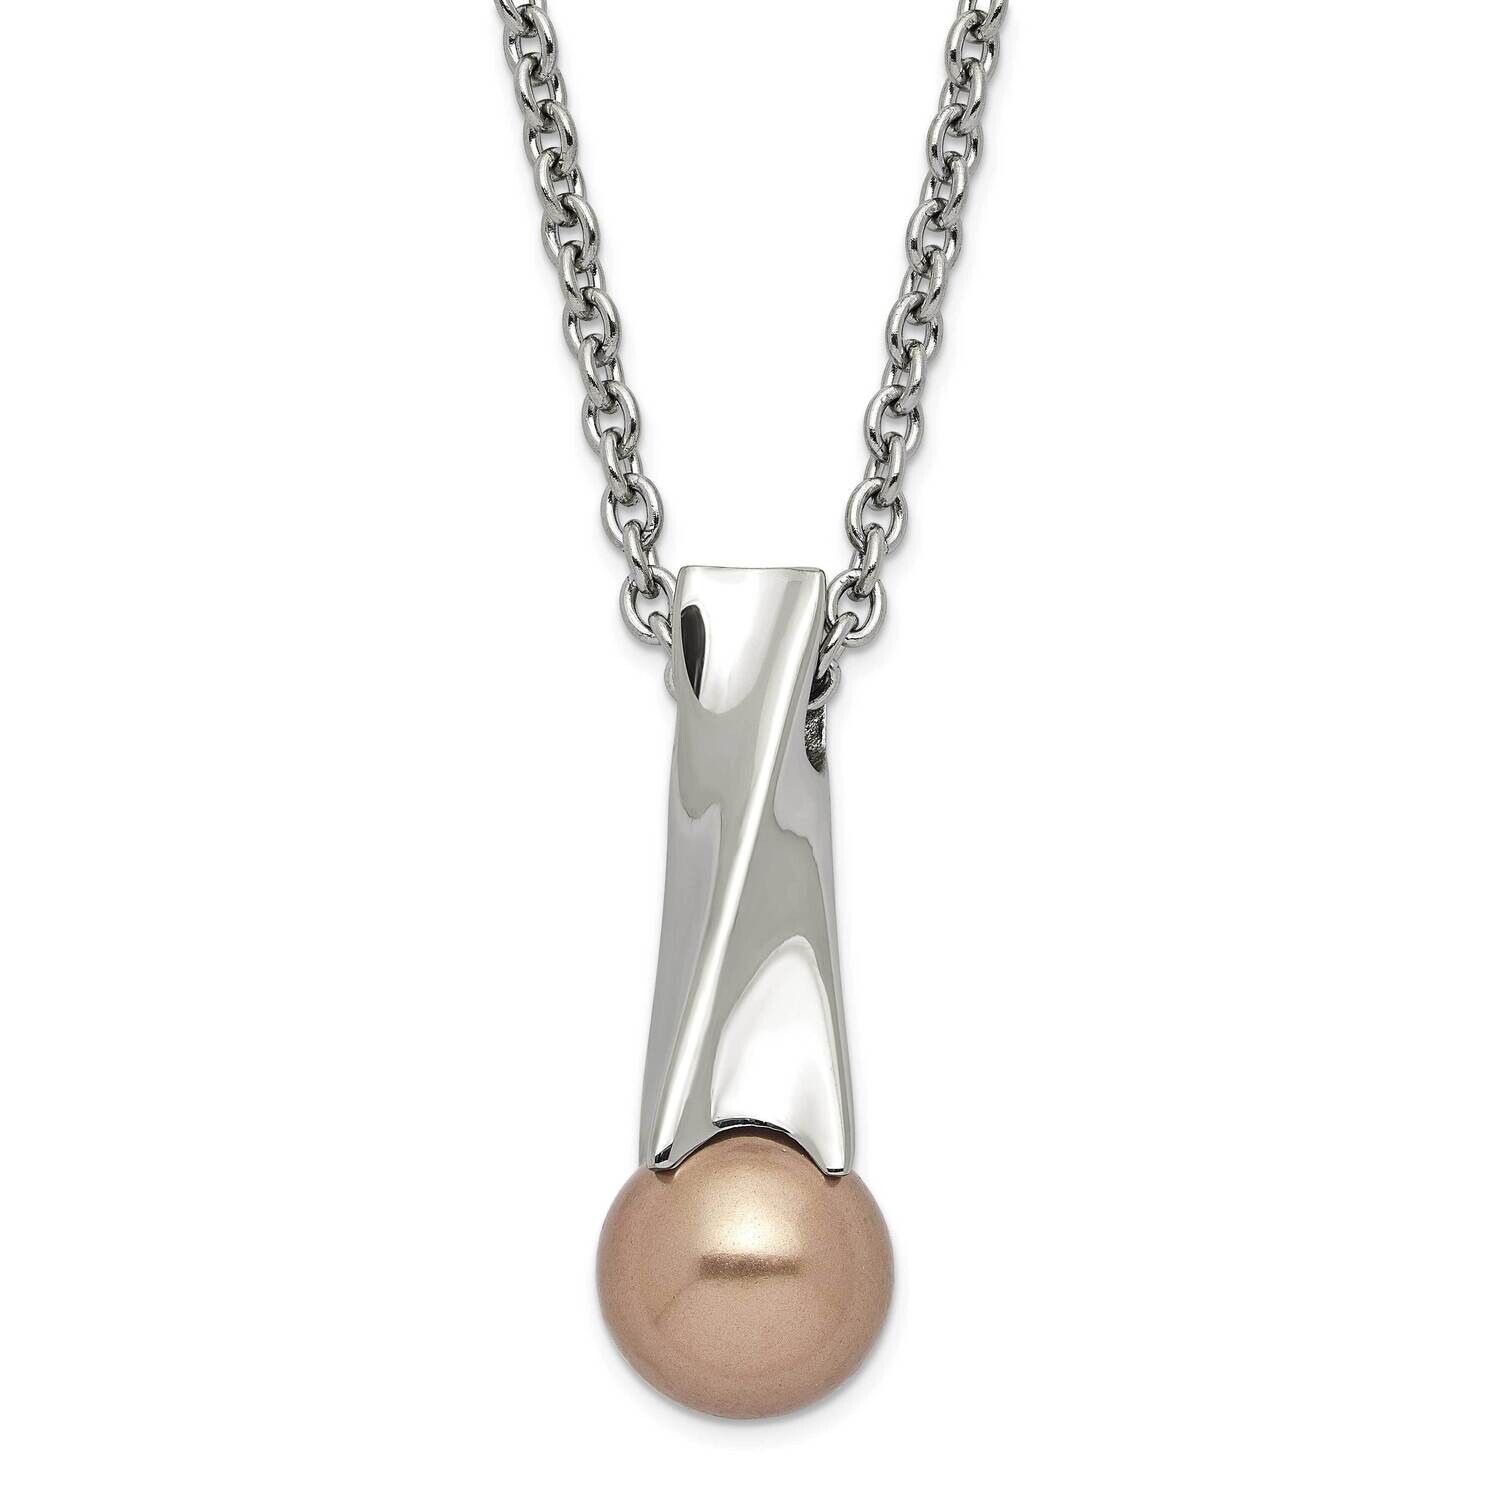 Polished Champagne Simulated Pearl & CZ Pendant Necklace Stainless Steel SRN1025-18